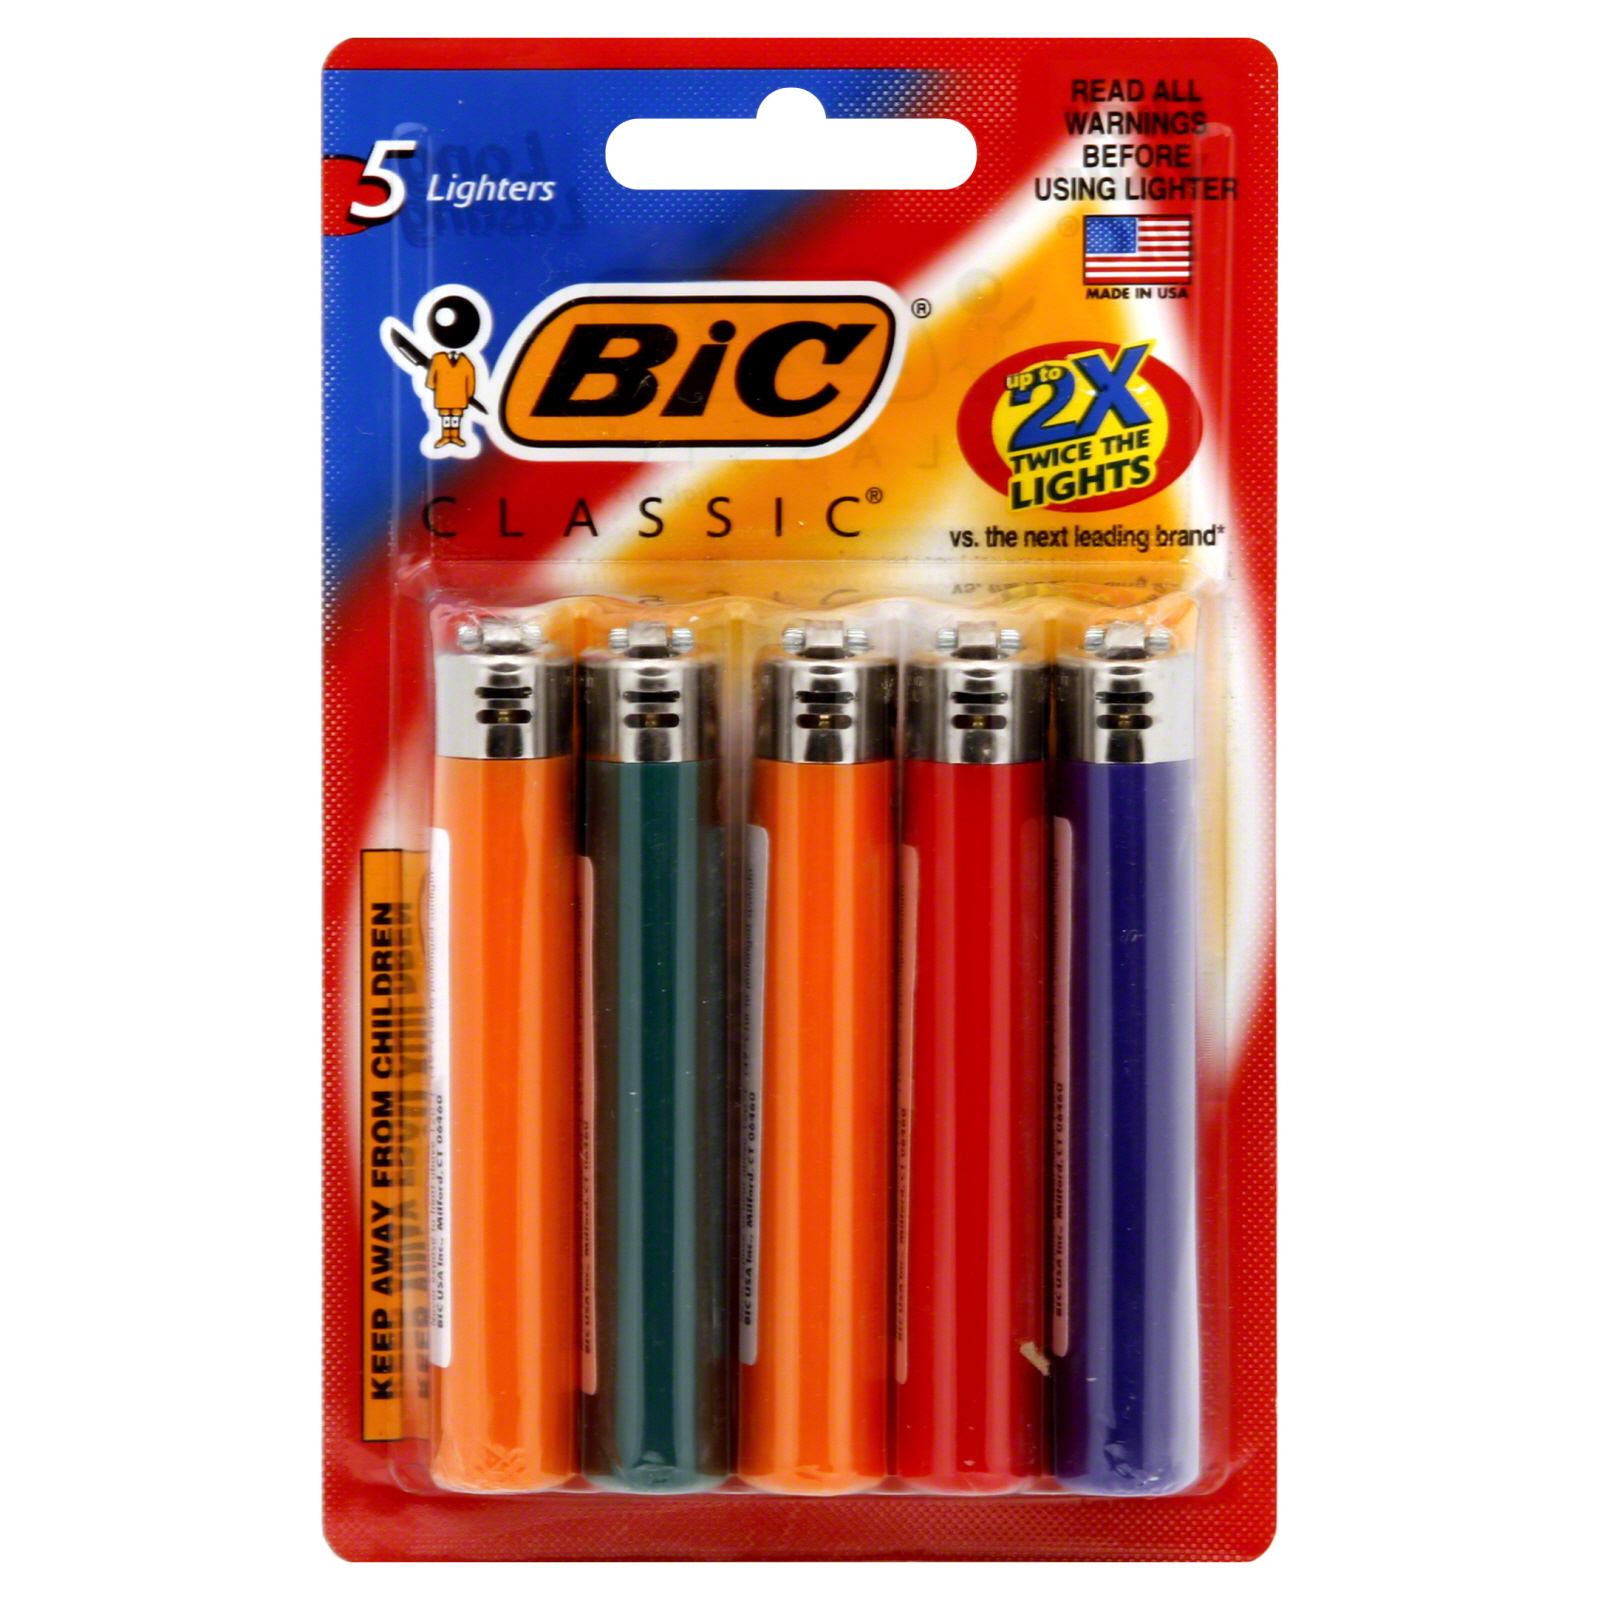 BIC Classic Lighters, 5 lighters